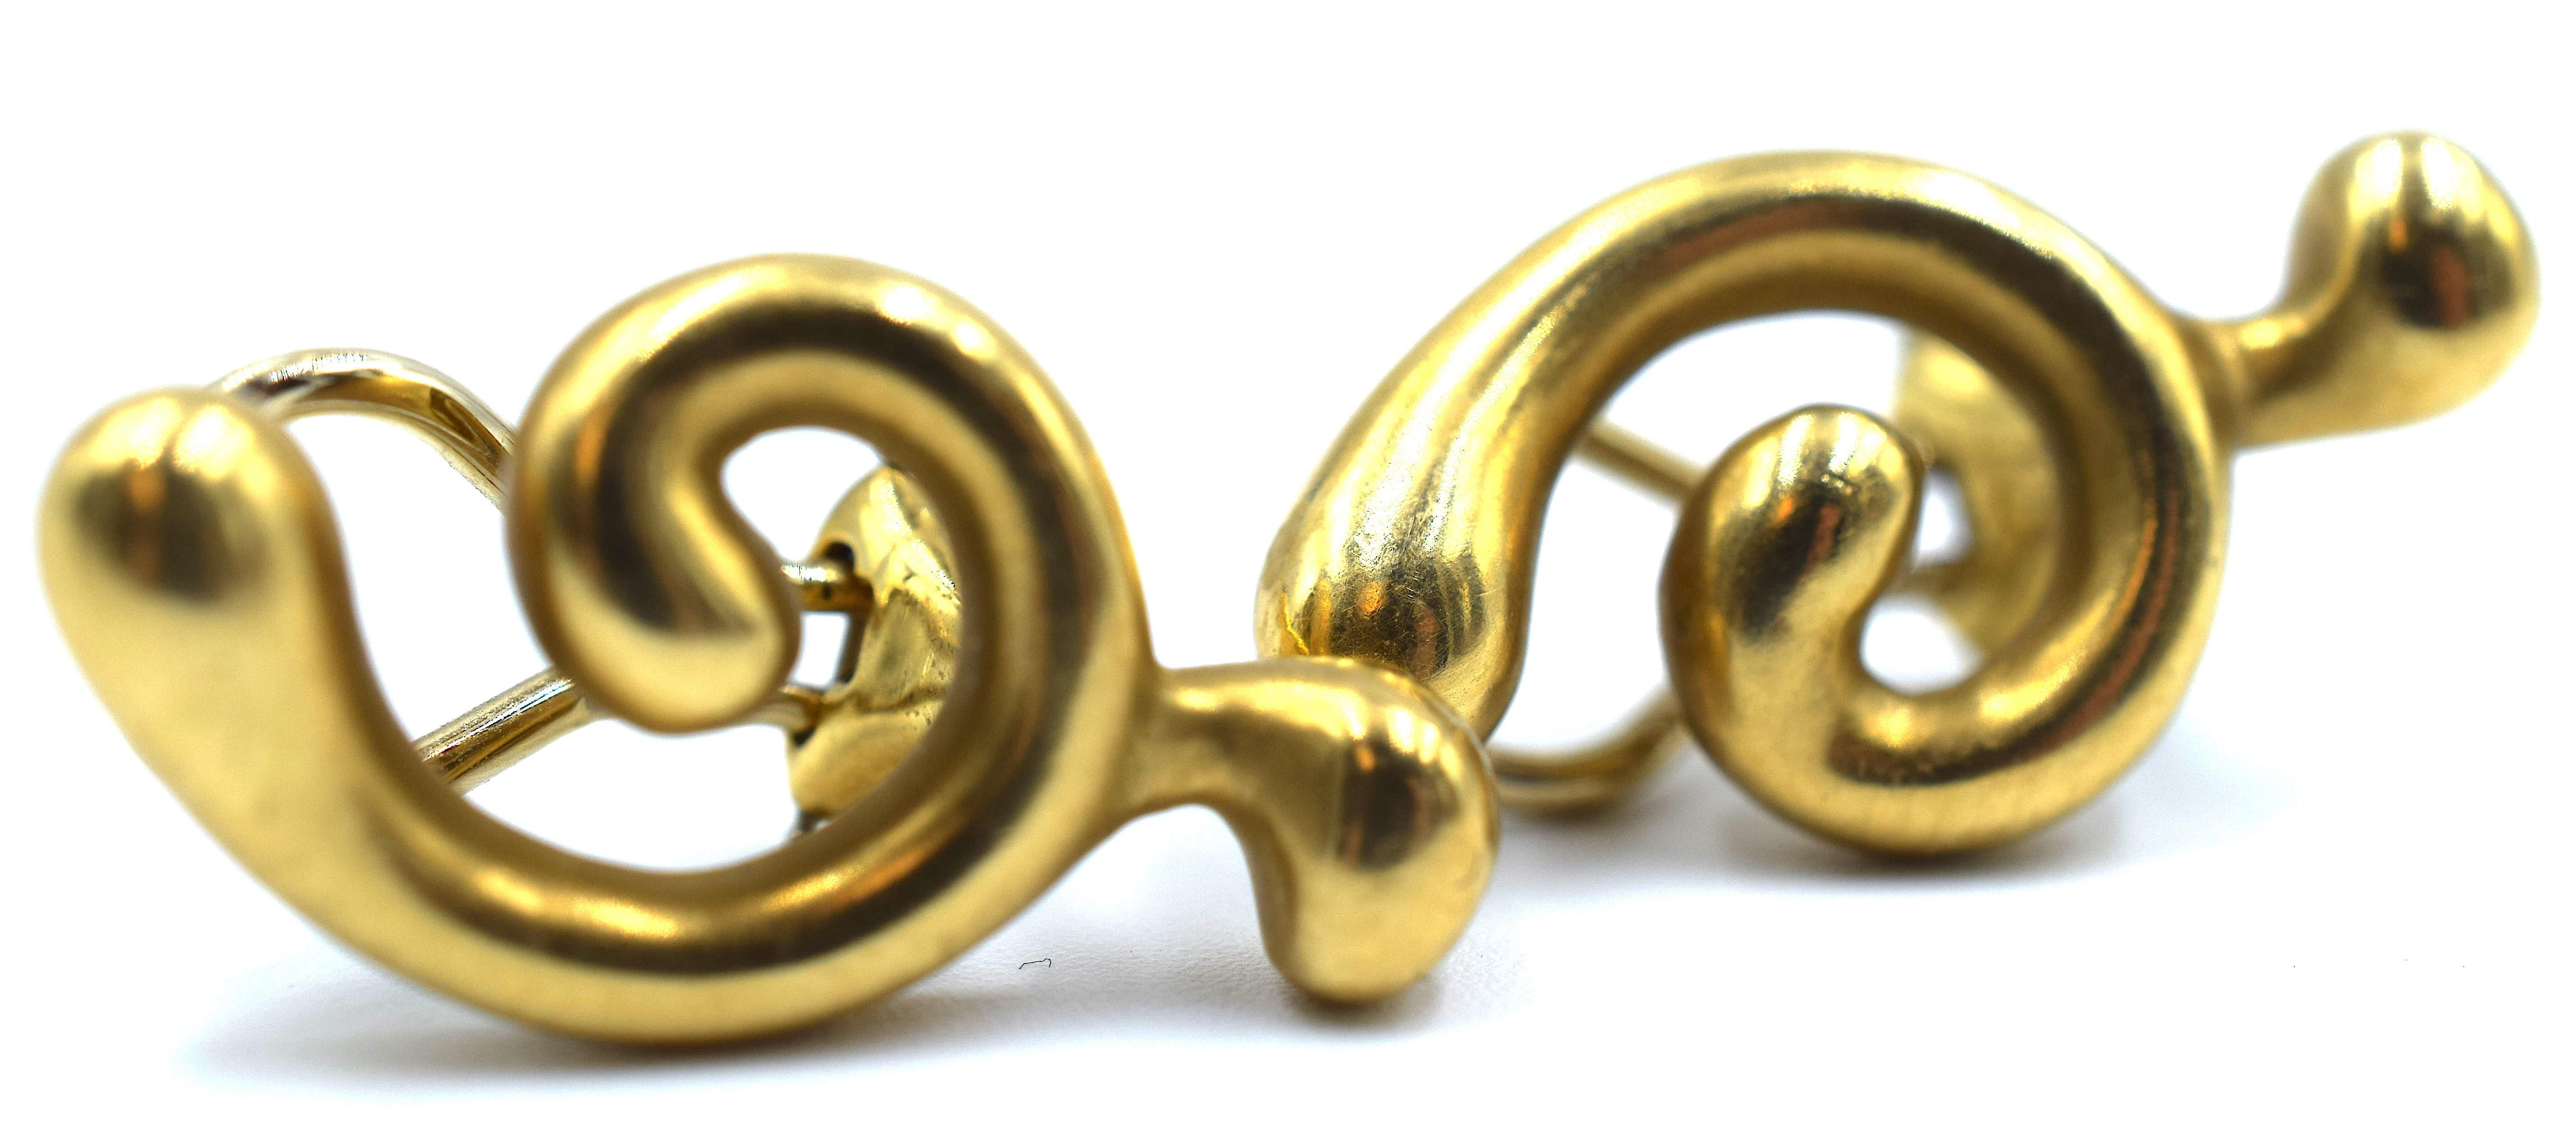 Amazing pair of vintage earrings from famed designer Angela Cummings. These earrings are crafted in 18k yellow gold and show a satin finish.  This contemporary design shows a swirling pattern that is great for every day wear. The pair is hallmarked